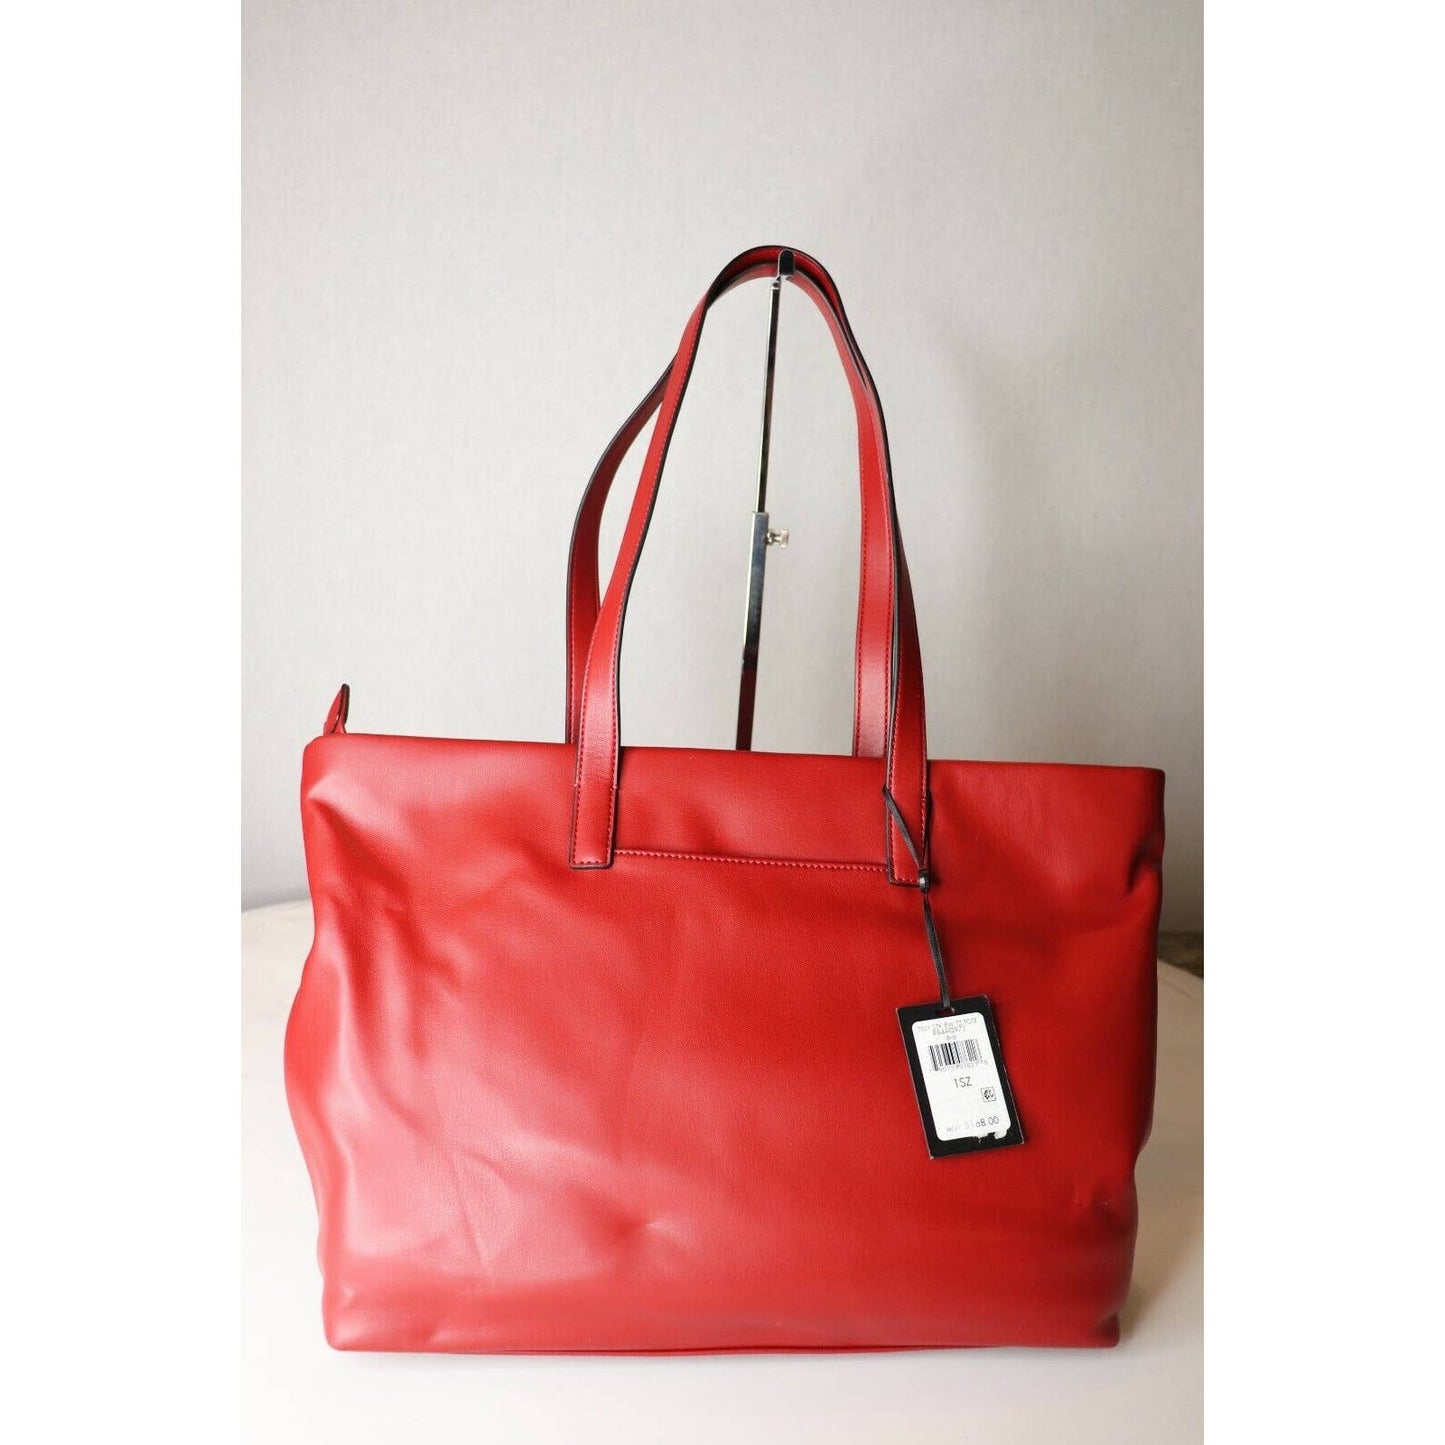 DKNY Tilly Stacked Logo Top Zip Tote, Red, NWT, $168